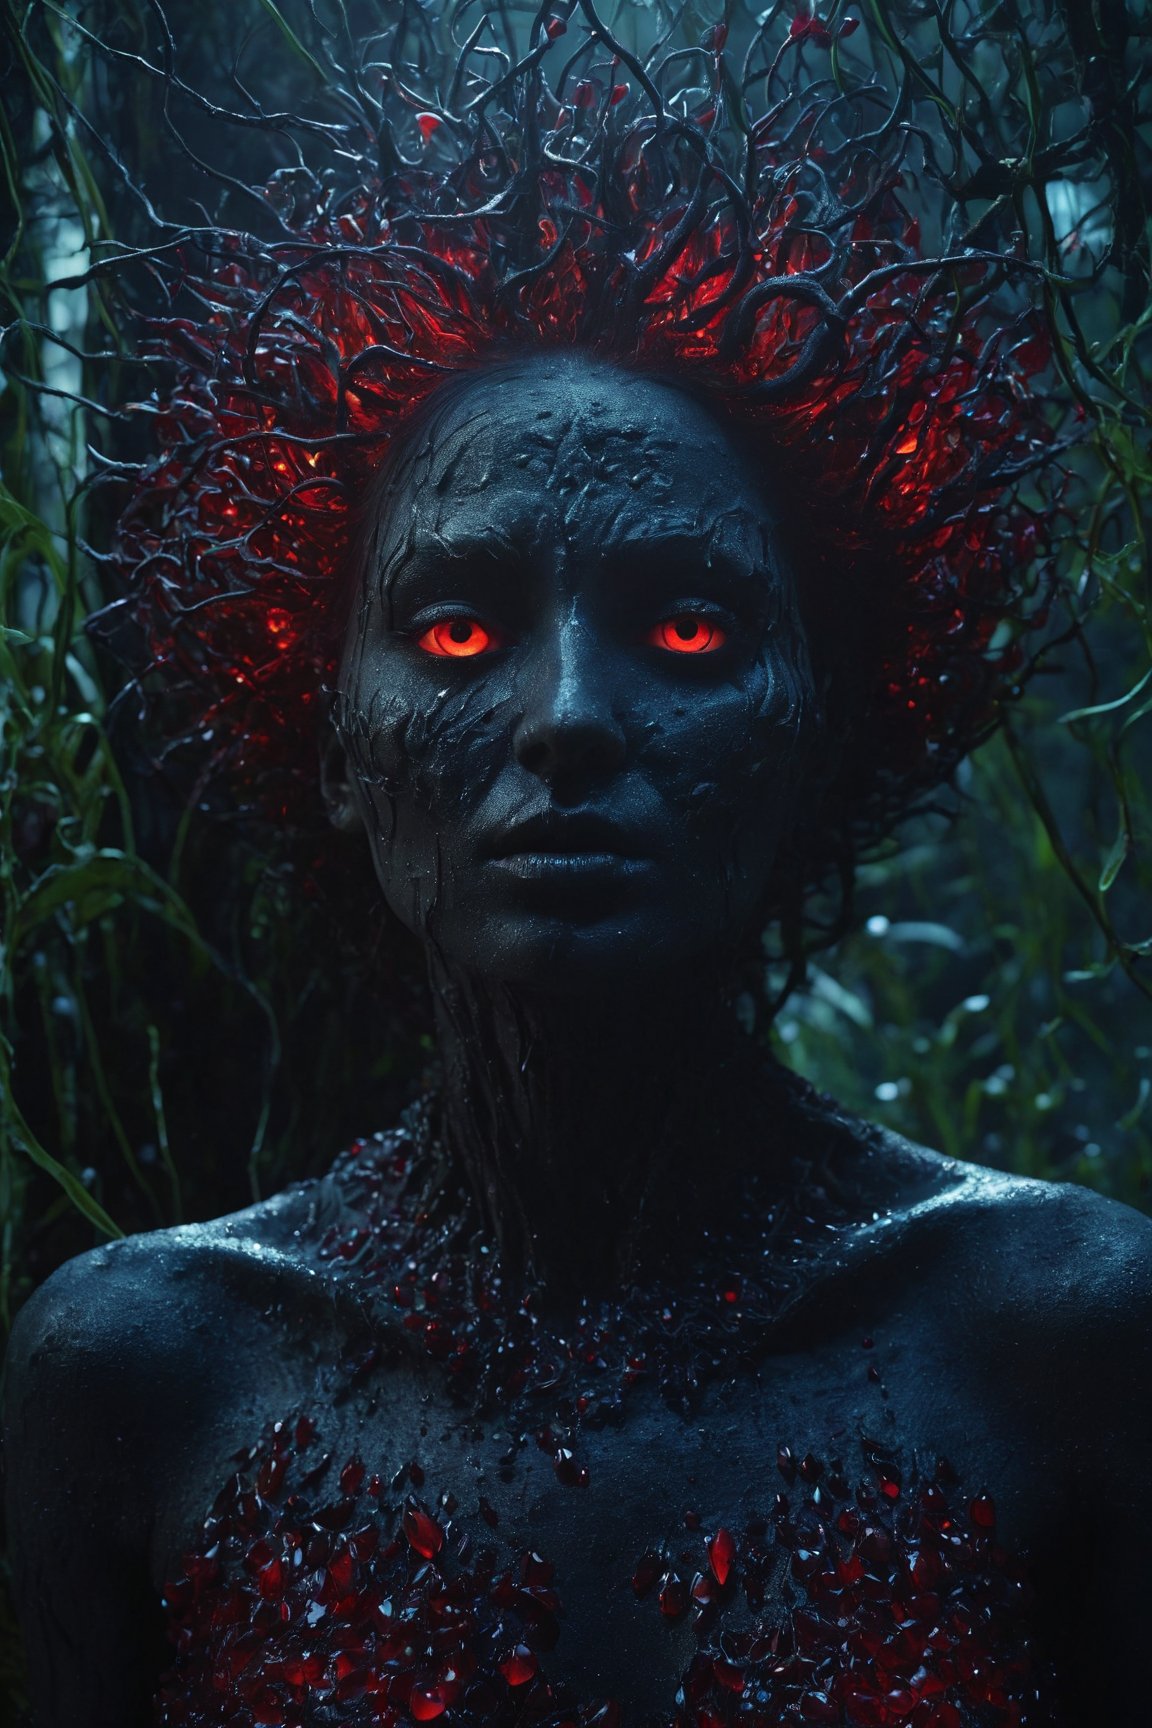 (best quality,8K,UHD,ultra-res), hyper-detailed, (nightmarish, malevolent) portrayal of an ominous soul emerging from the abyss of a desolate and mysterious wasteland. The figure, with skin oozing and crystal red eyes gleaming, embodies the eerie styles of artists Filip Hodas, Sandy Skoglund, and Natalia Rak. Imagine this sinister entity within a bioluminescent jungle, where organic forms and dynamic lighting create a hauntingly realistic scene. Executed in the style of a detailed and unforgettable hyper-realistic rendering, this illustration utilizing Octane Render captures every ghastly detail with maximum precision.